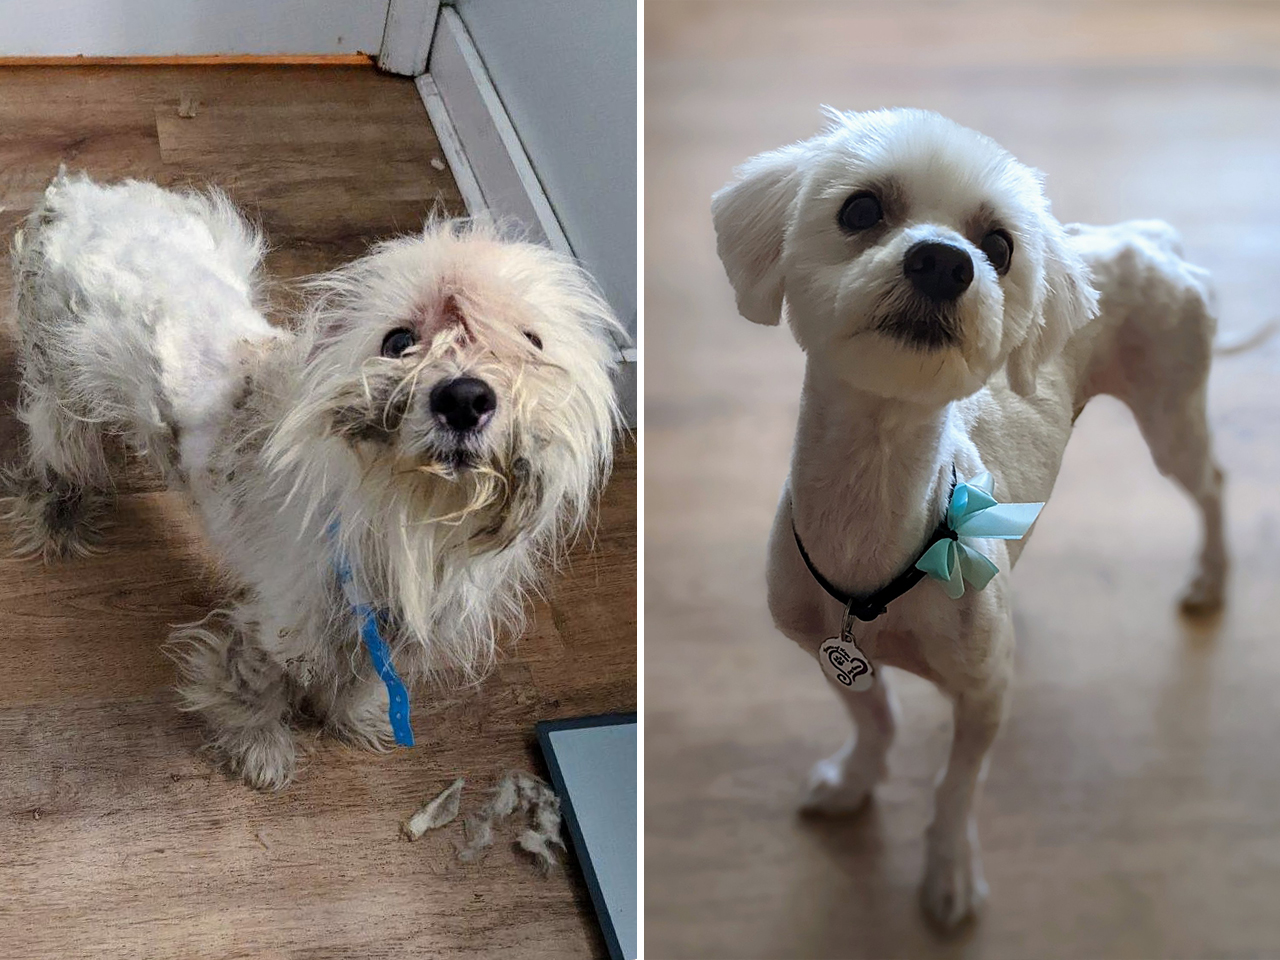 Louie was found underweight, covered in fleas and severely matted. After his grooming his appearance finally matched his personality, and he won the hearts of a forever family.